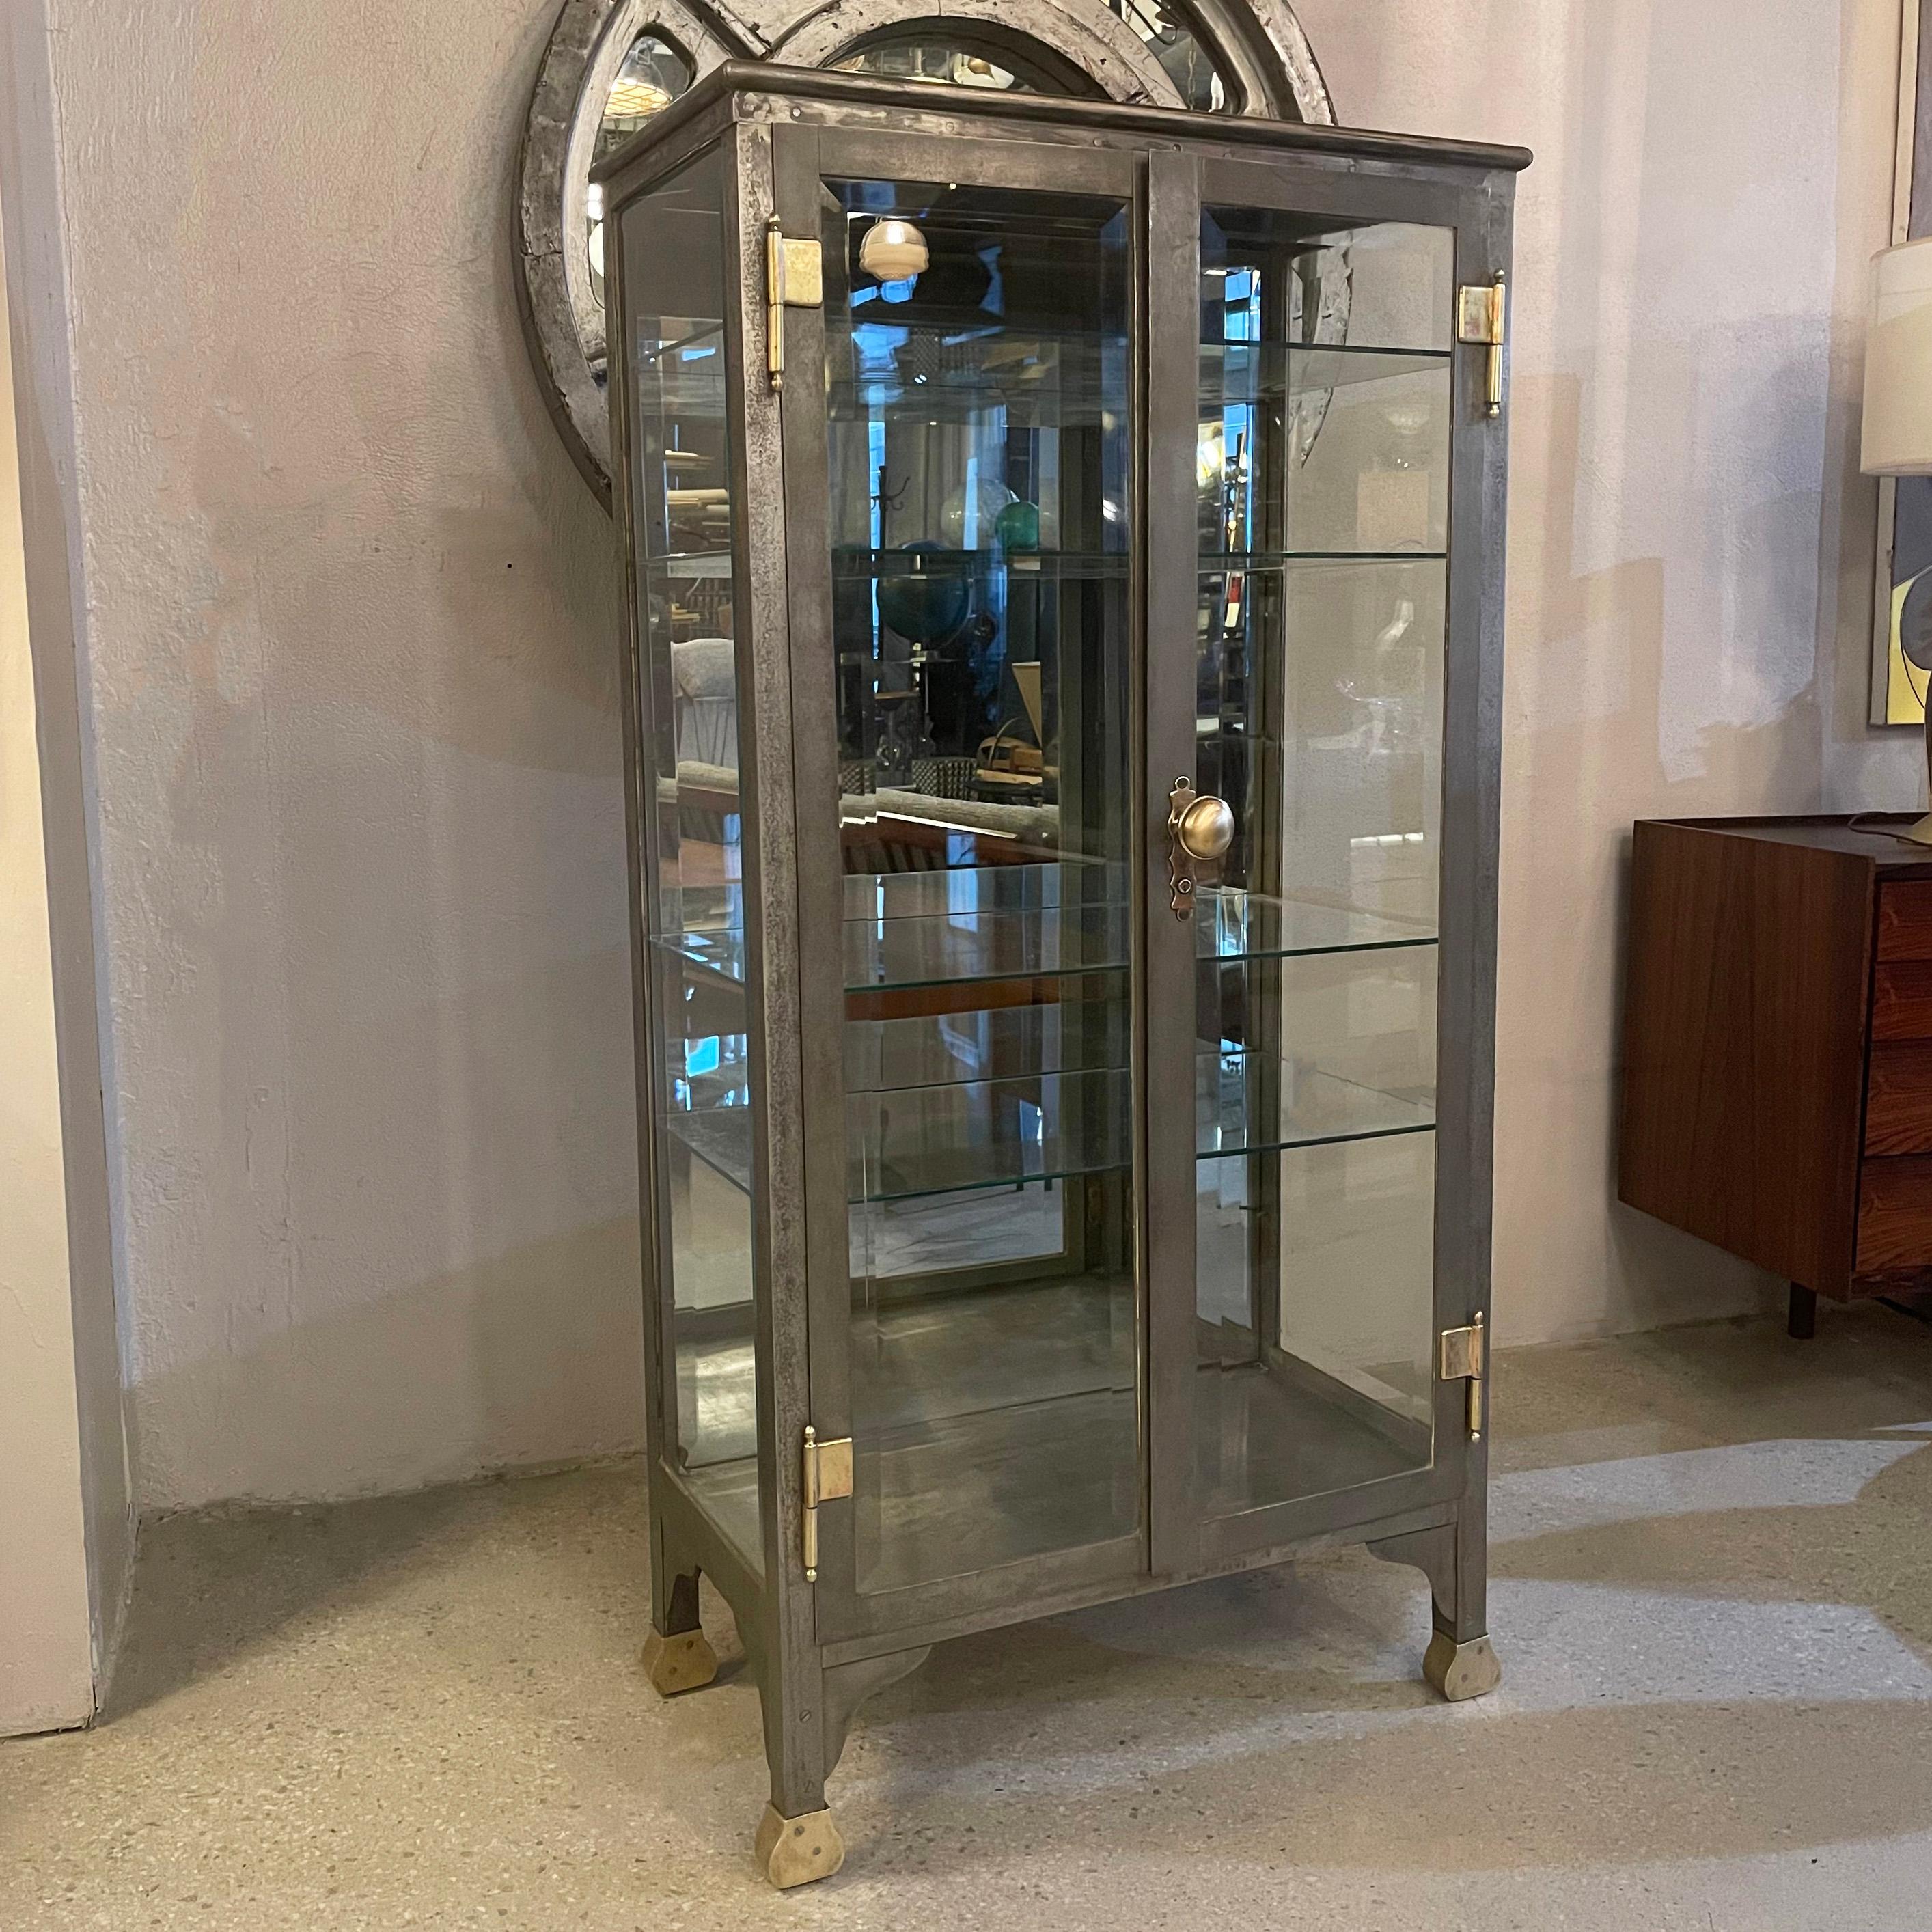 Exceptional, antique, double door, apothecary display cabinet features a patinated brushed steel finish inside and out with brass accents. The cabinet circa 1880's has beveled glass on three sides and mirror interior backing with four glass shelves